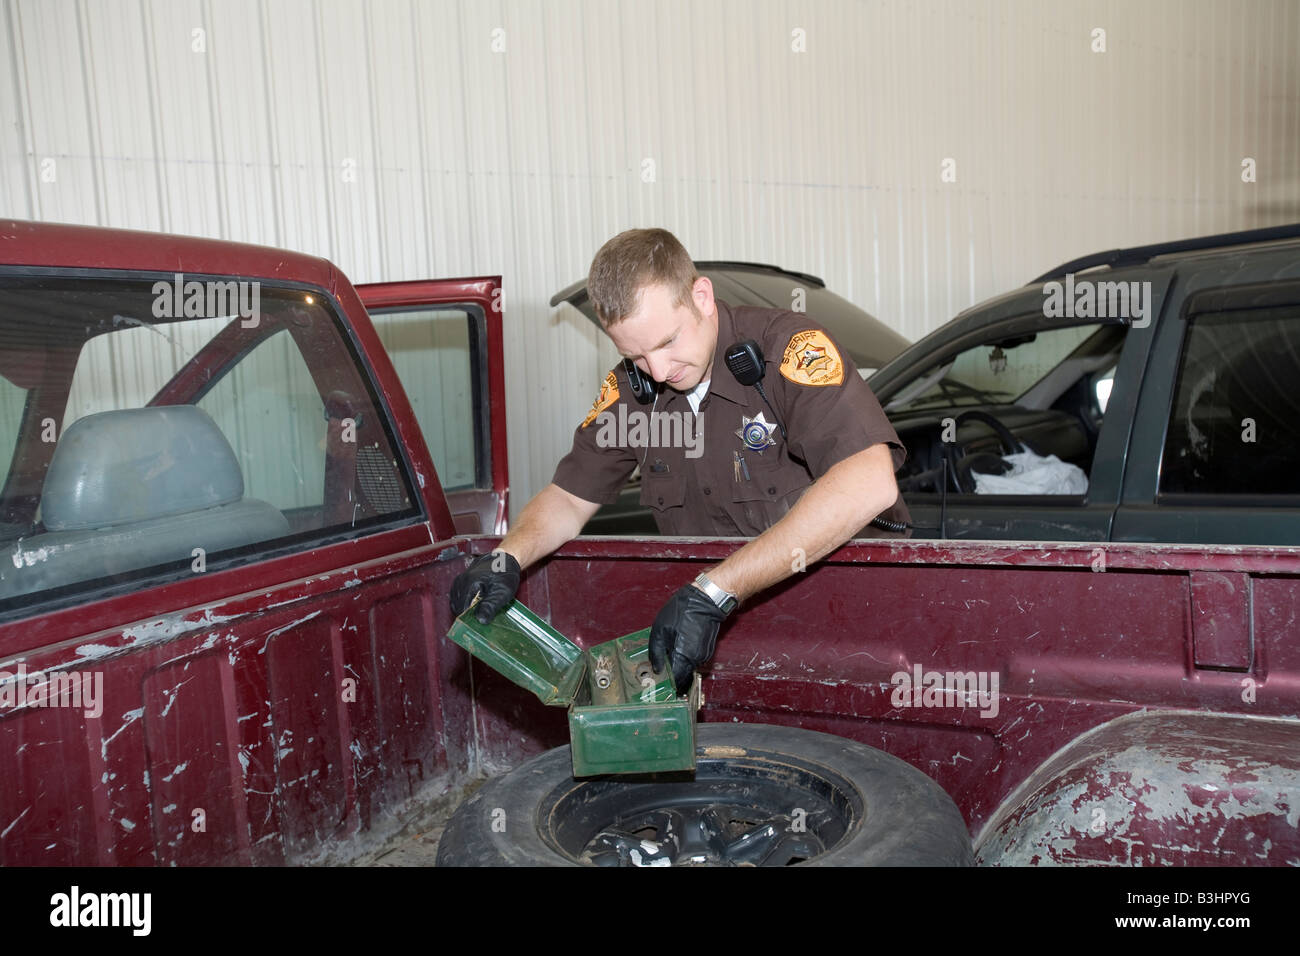 Deputy sheriff searching vehicle for drugs and other illegal items. Stock Photo